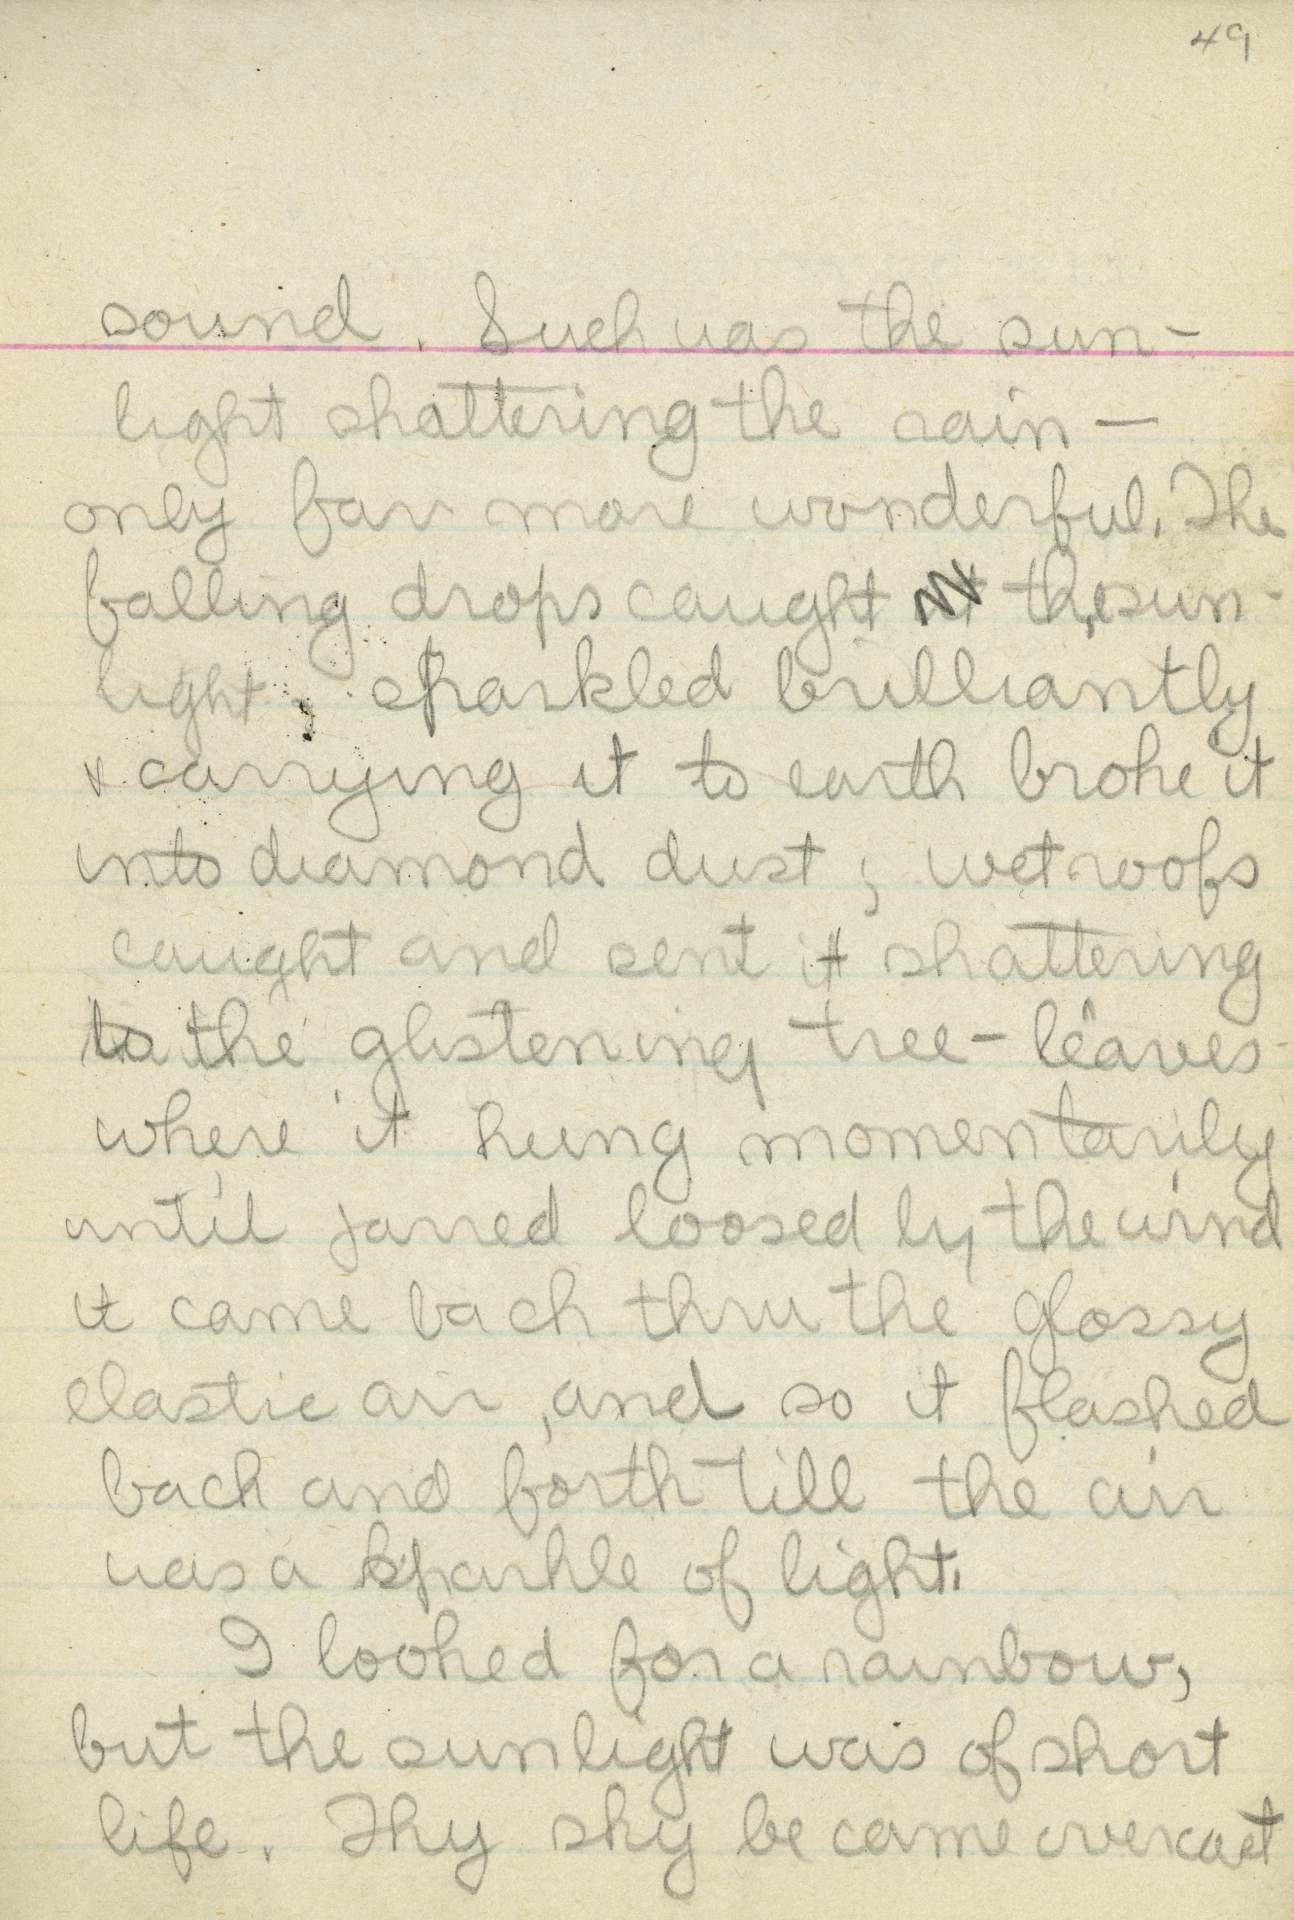 Untitled (Journal Page), Pg 49